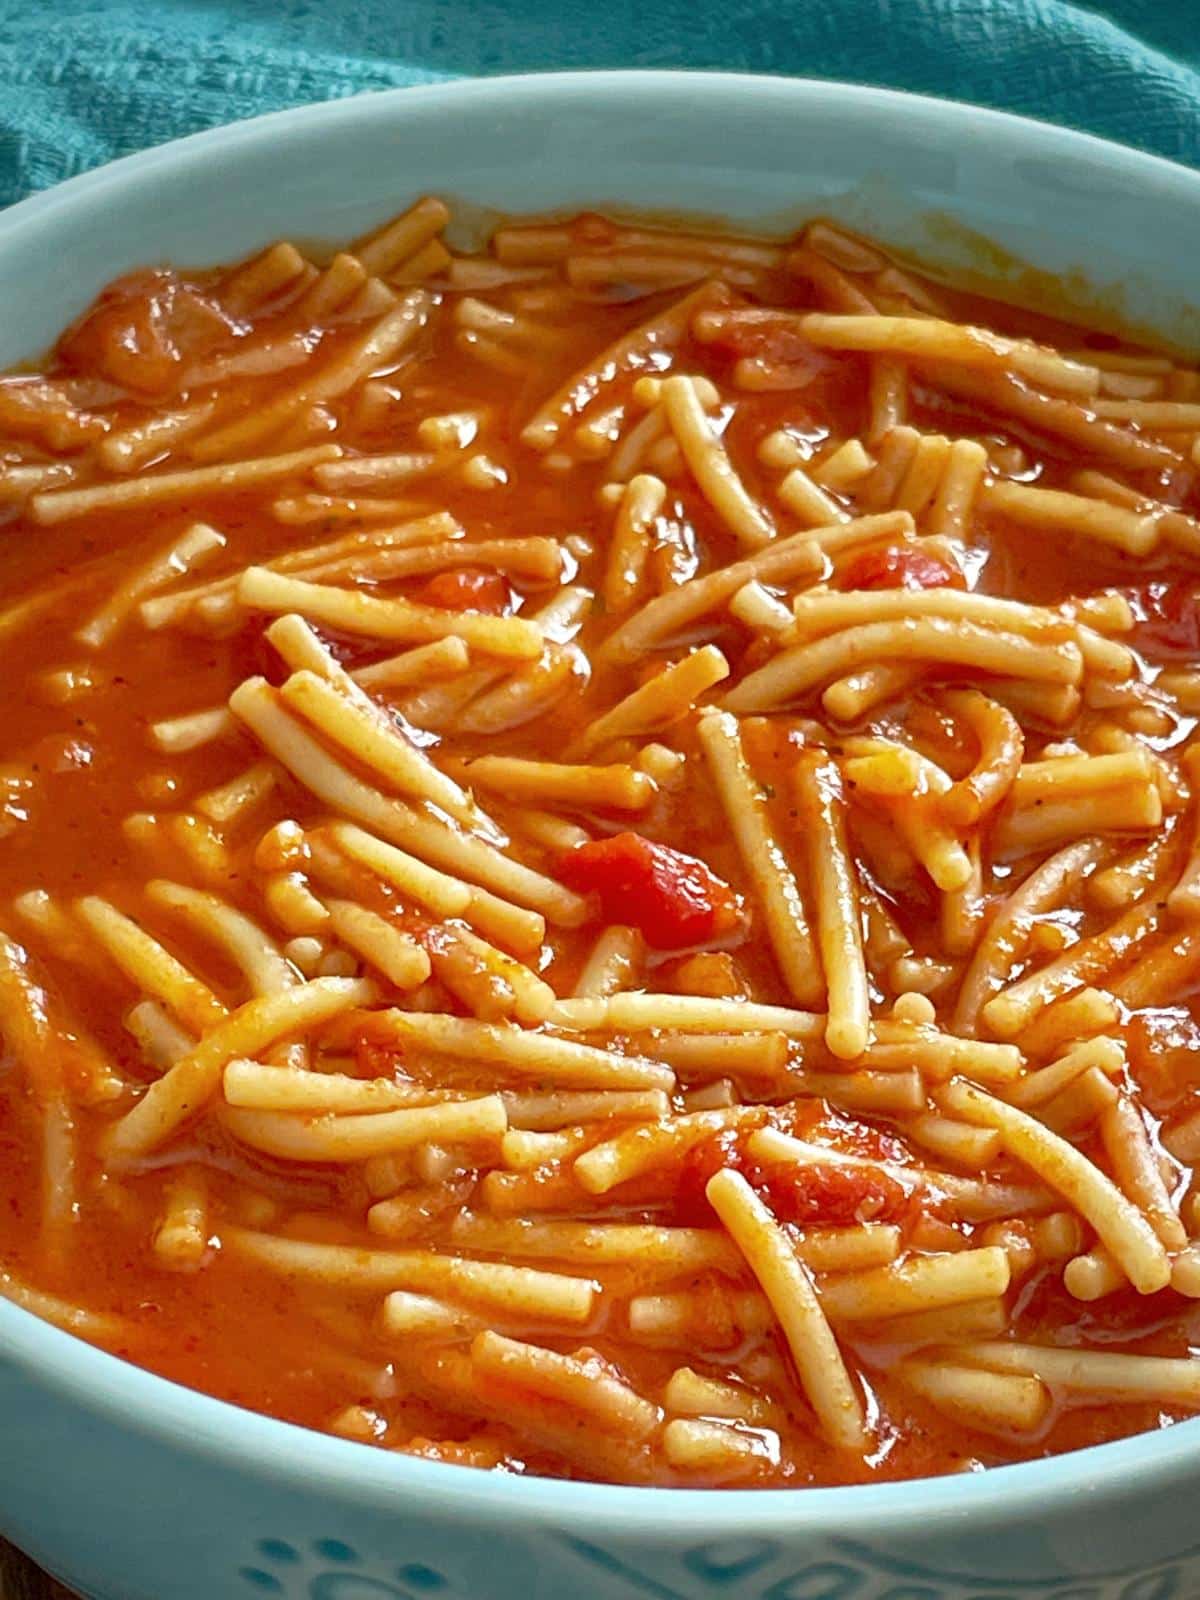 Fideo made with tomato sauce.